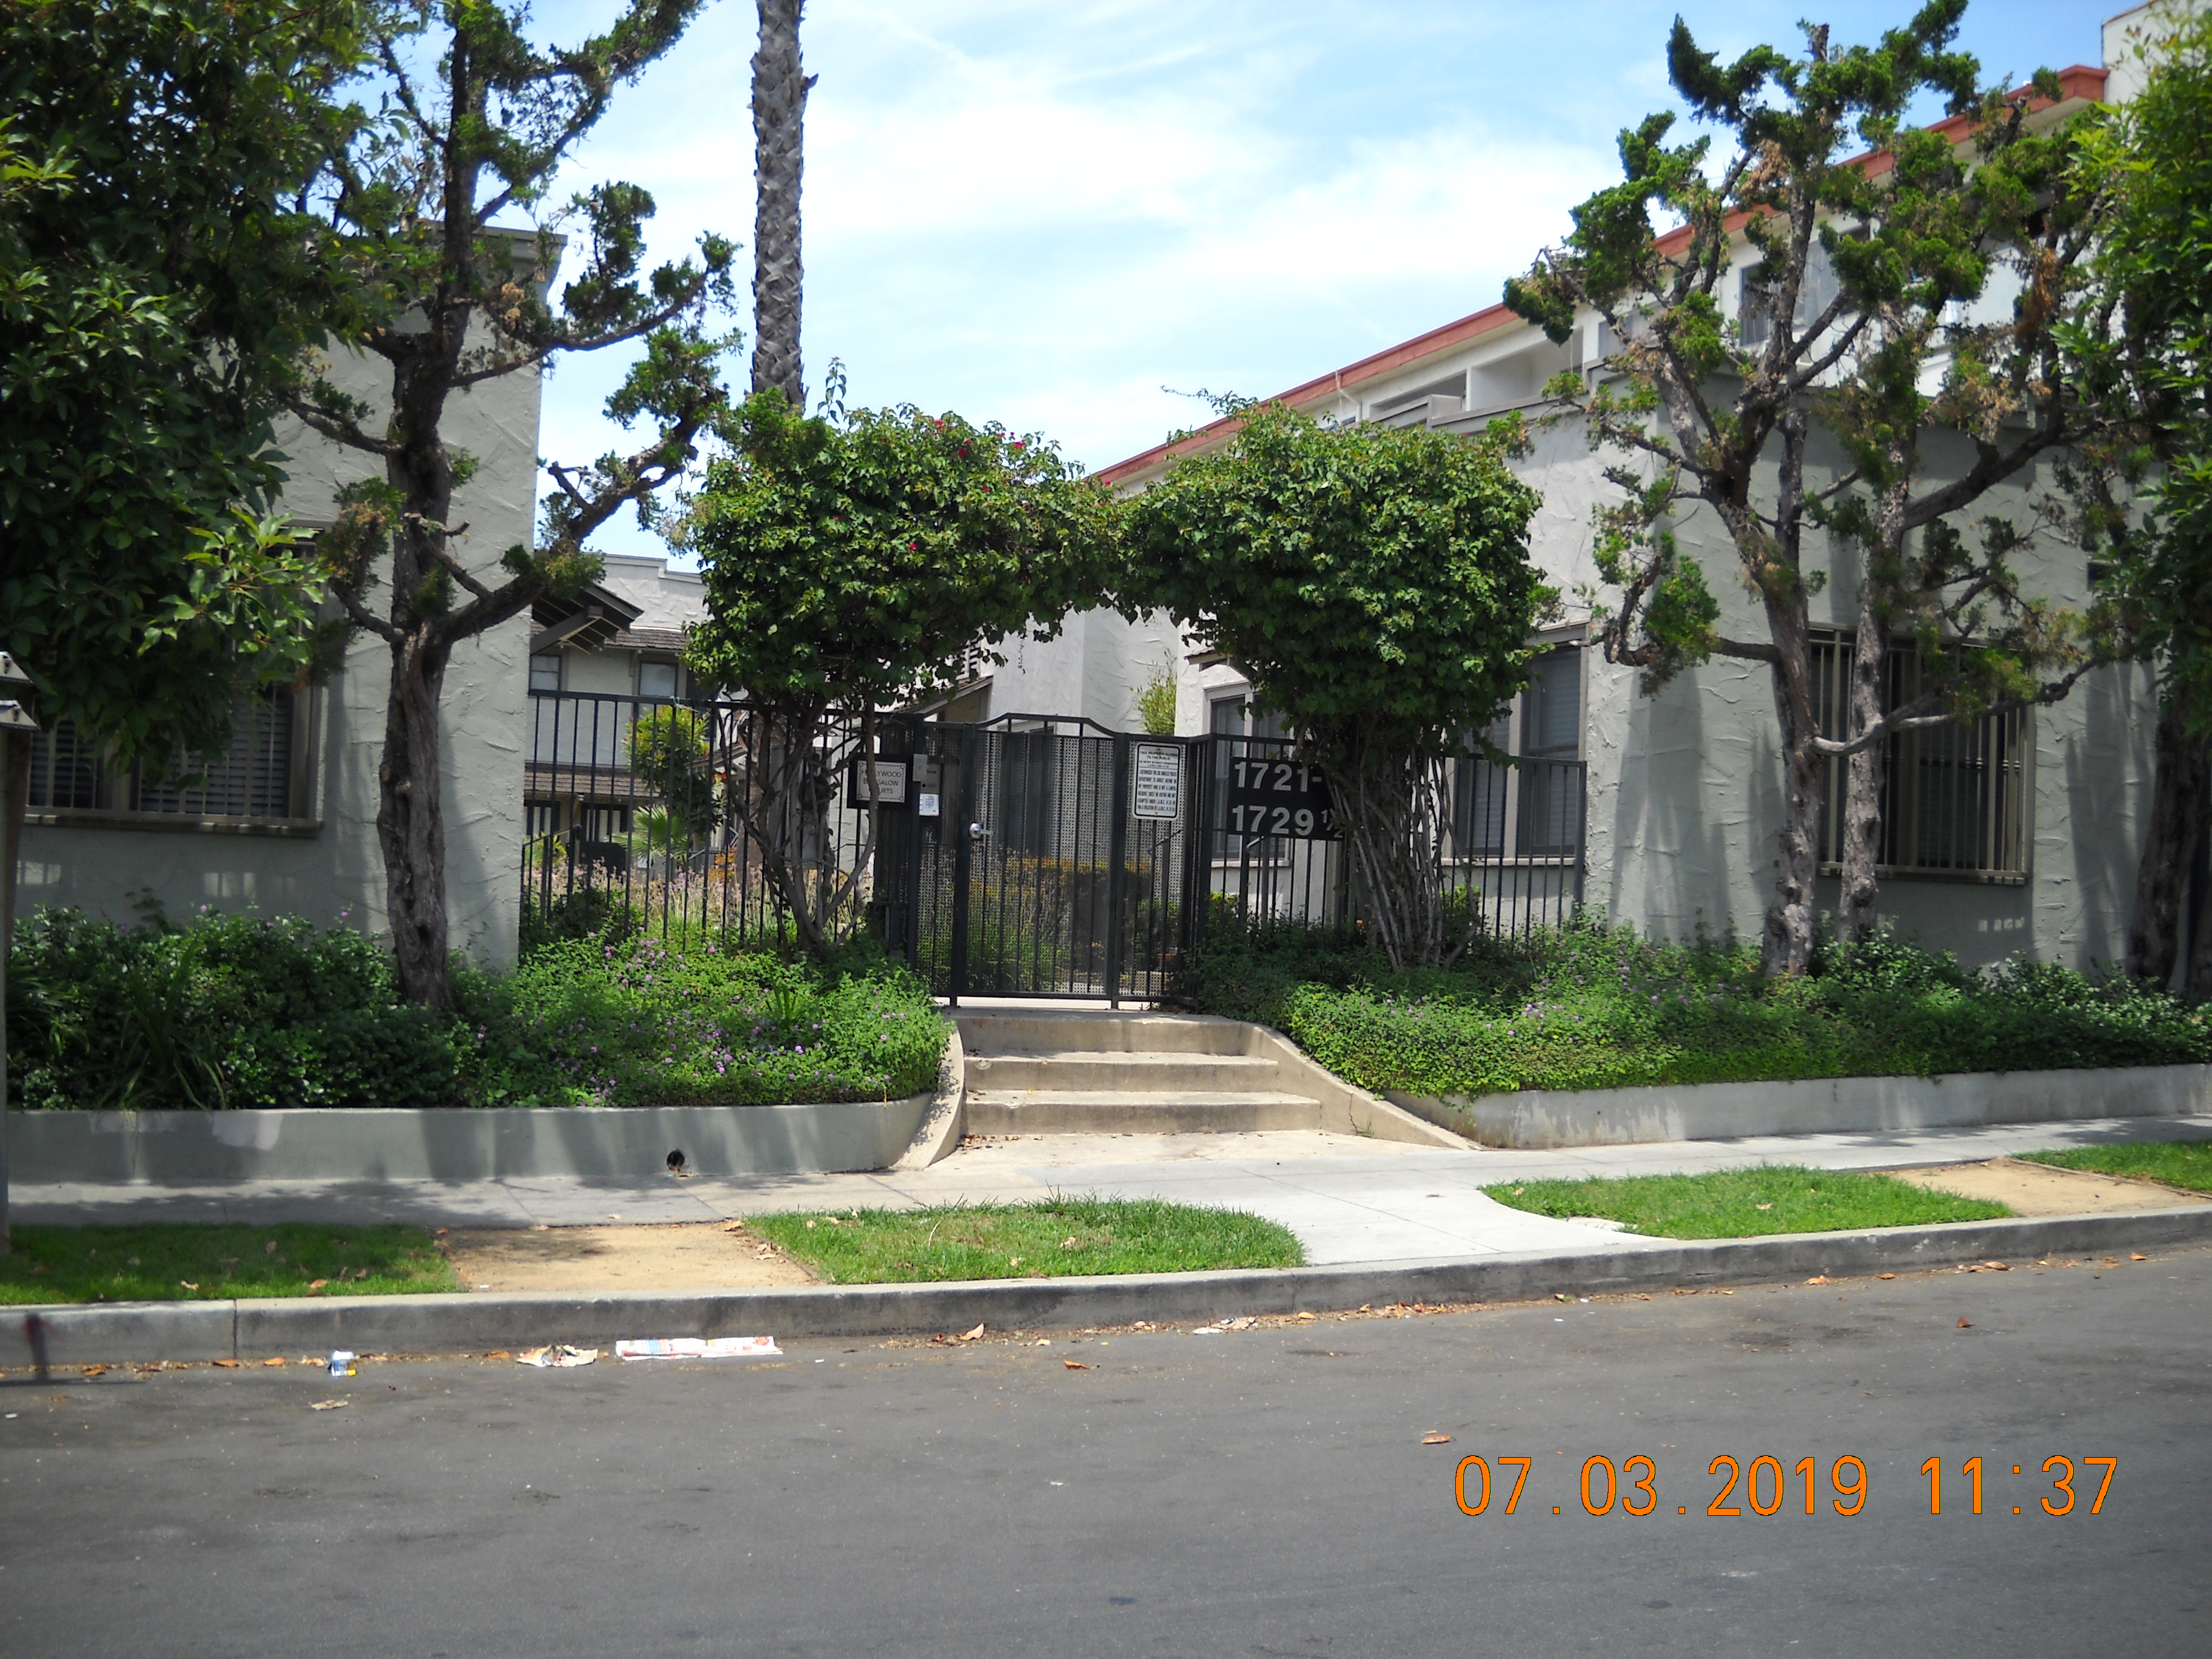 Front view of a two story gray building complex. Entry is gated, has a keypad, and three steps to enter. Units wrap around a center that contains plants, trees and bushes. There are trees and bushes in front of the building as well.